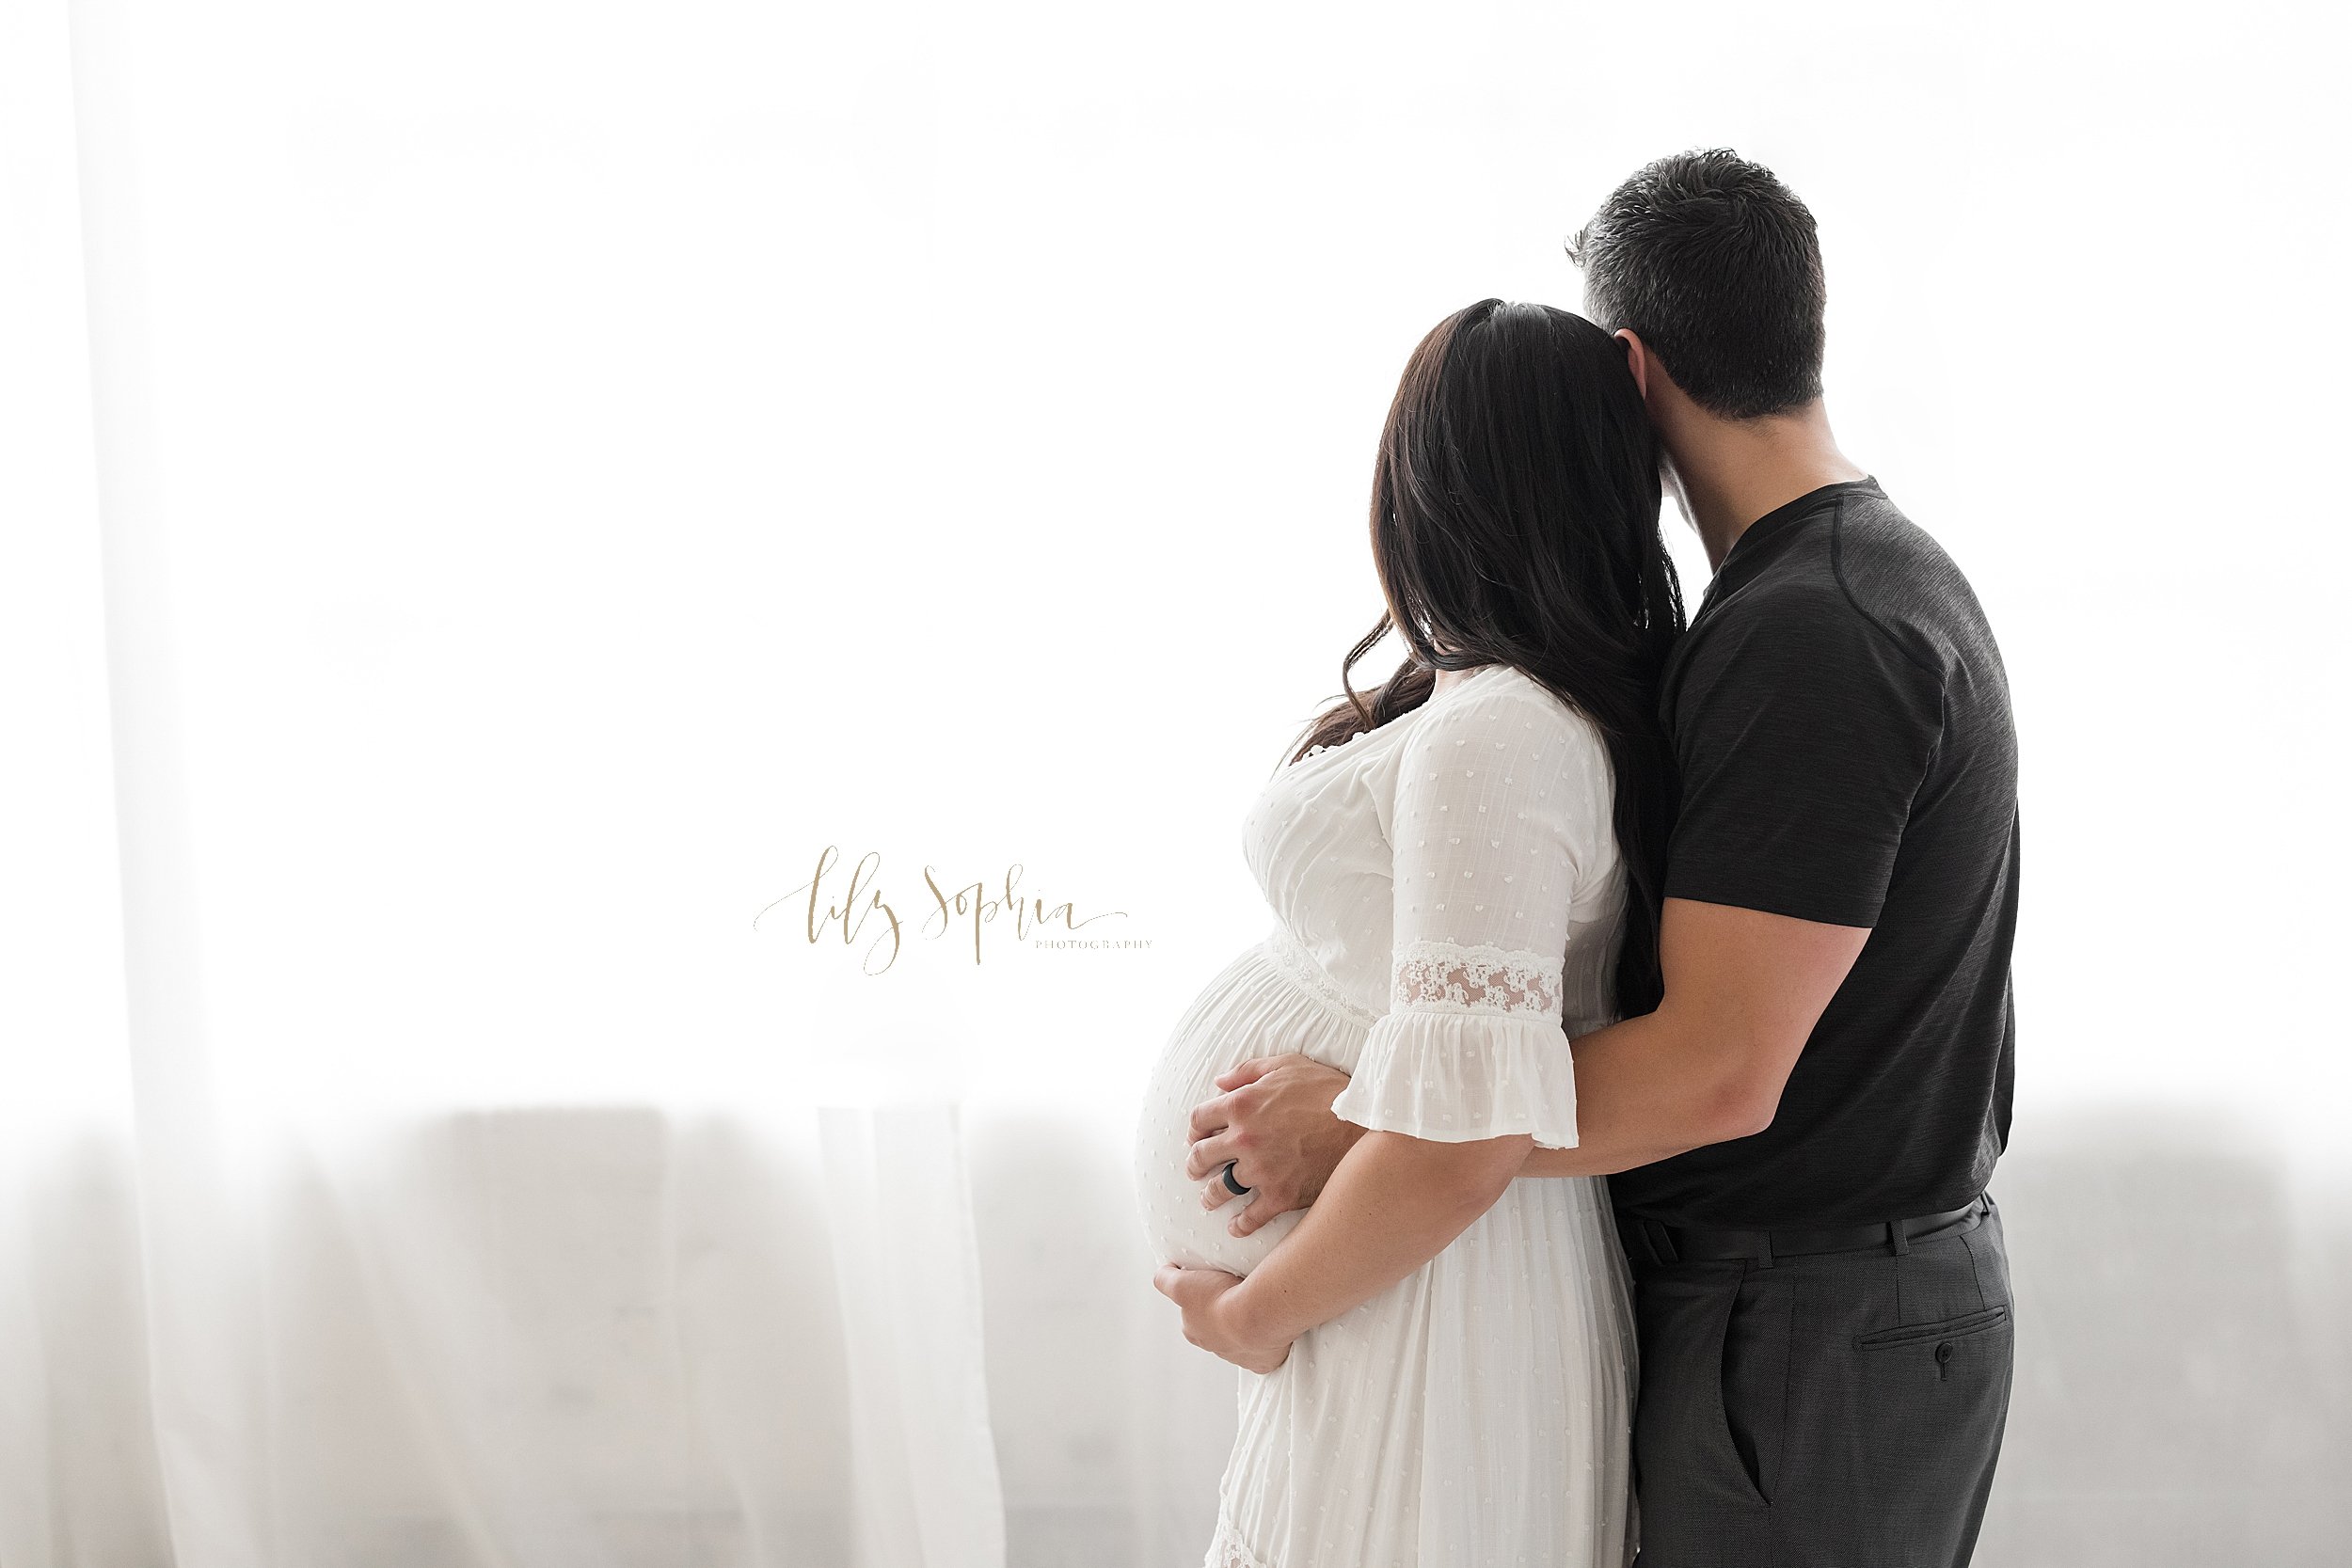  Maternity photo of a husband standing behind his pregnant wife with his arms wrapped around her with his hands resting on their child in utero and his wife with her hands holding her belly as the two of them look out a natural light window in a stud